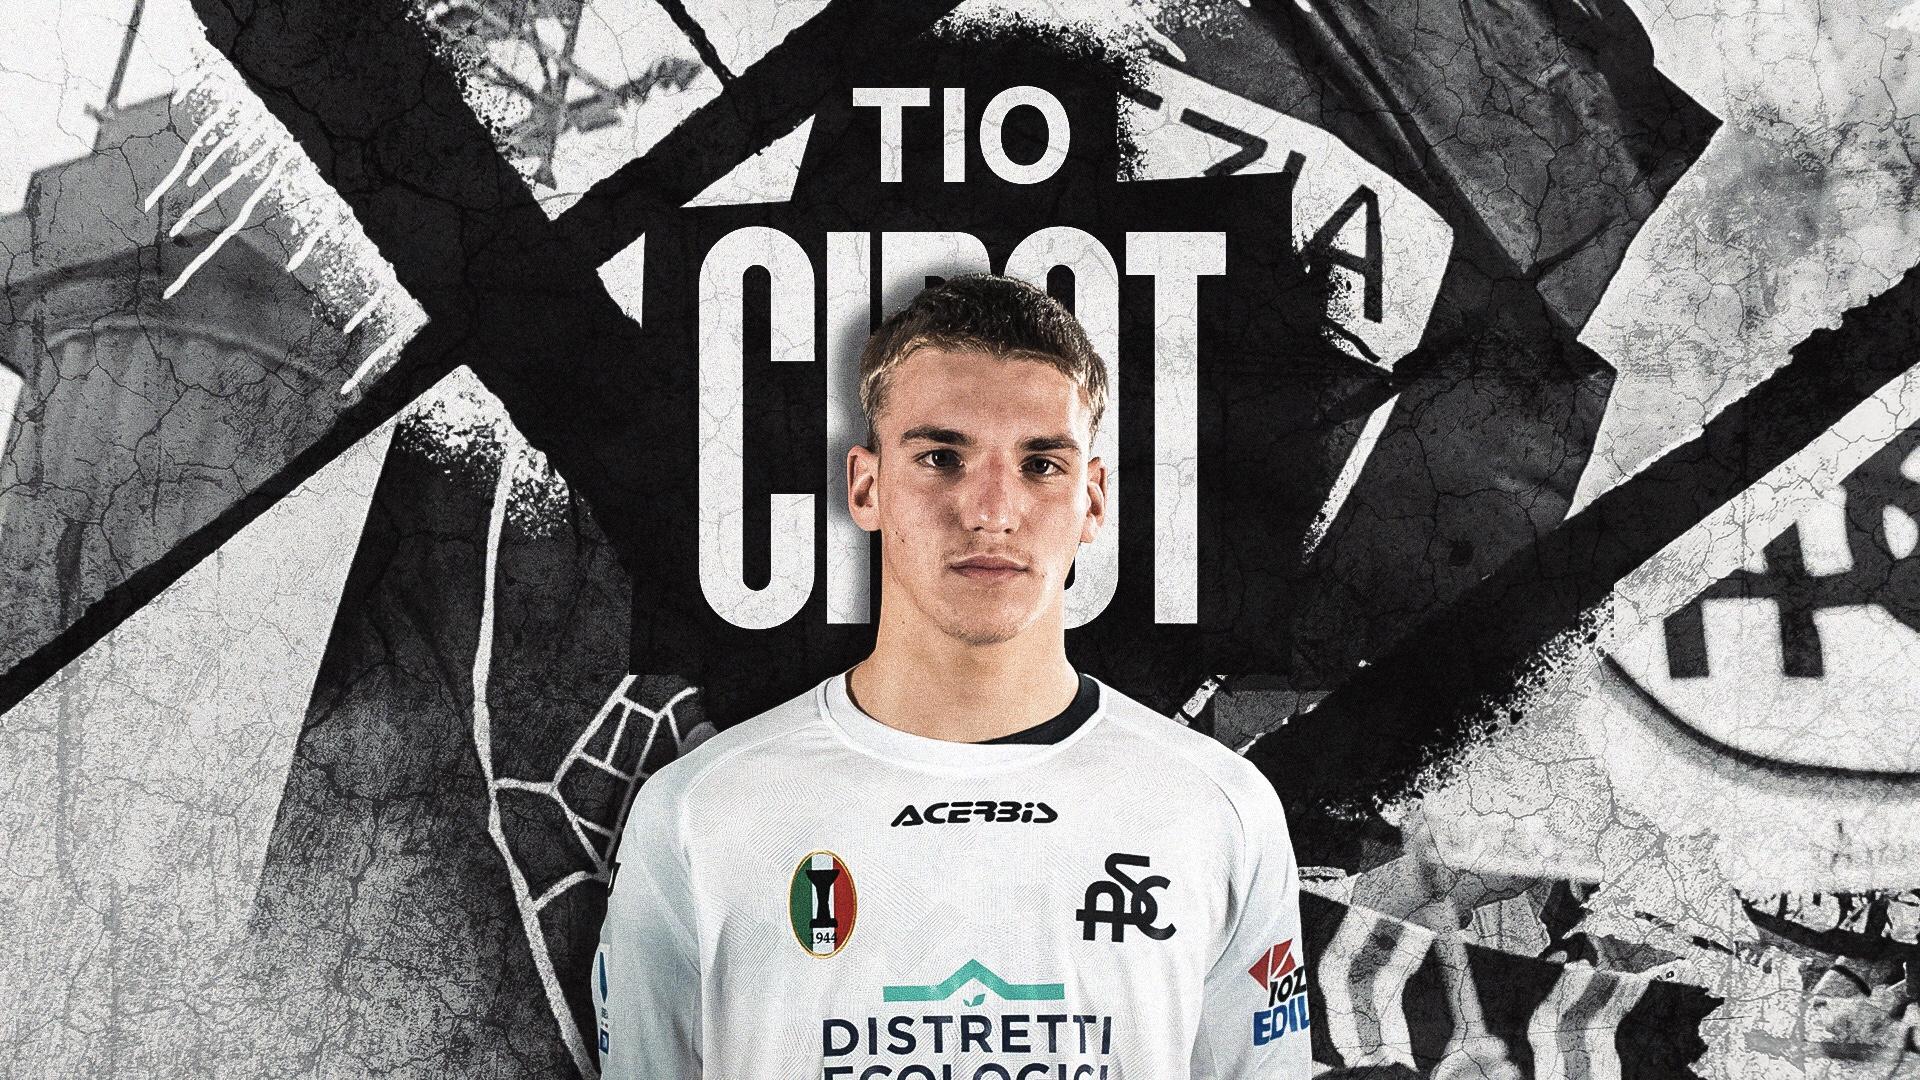 Official | Tio Cipot is a new Spezia player